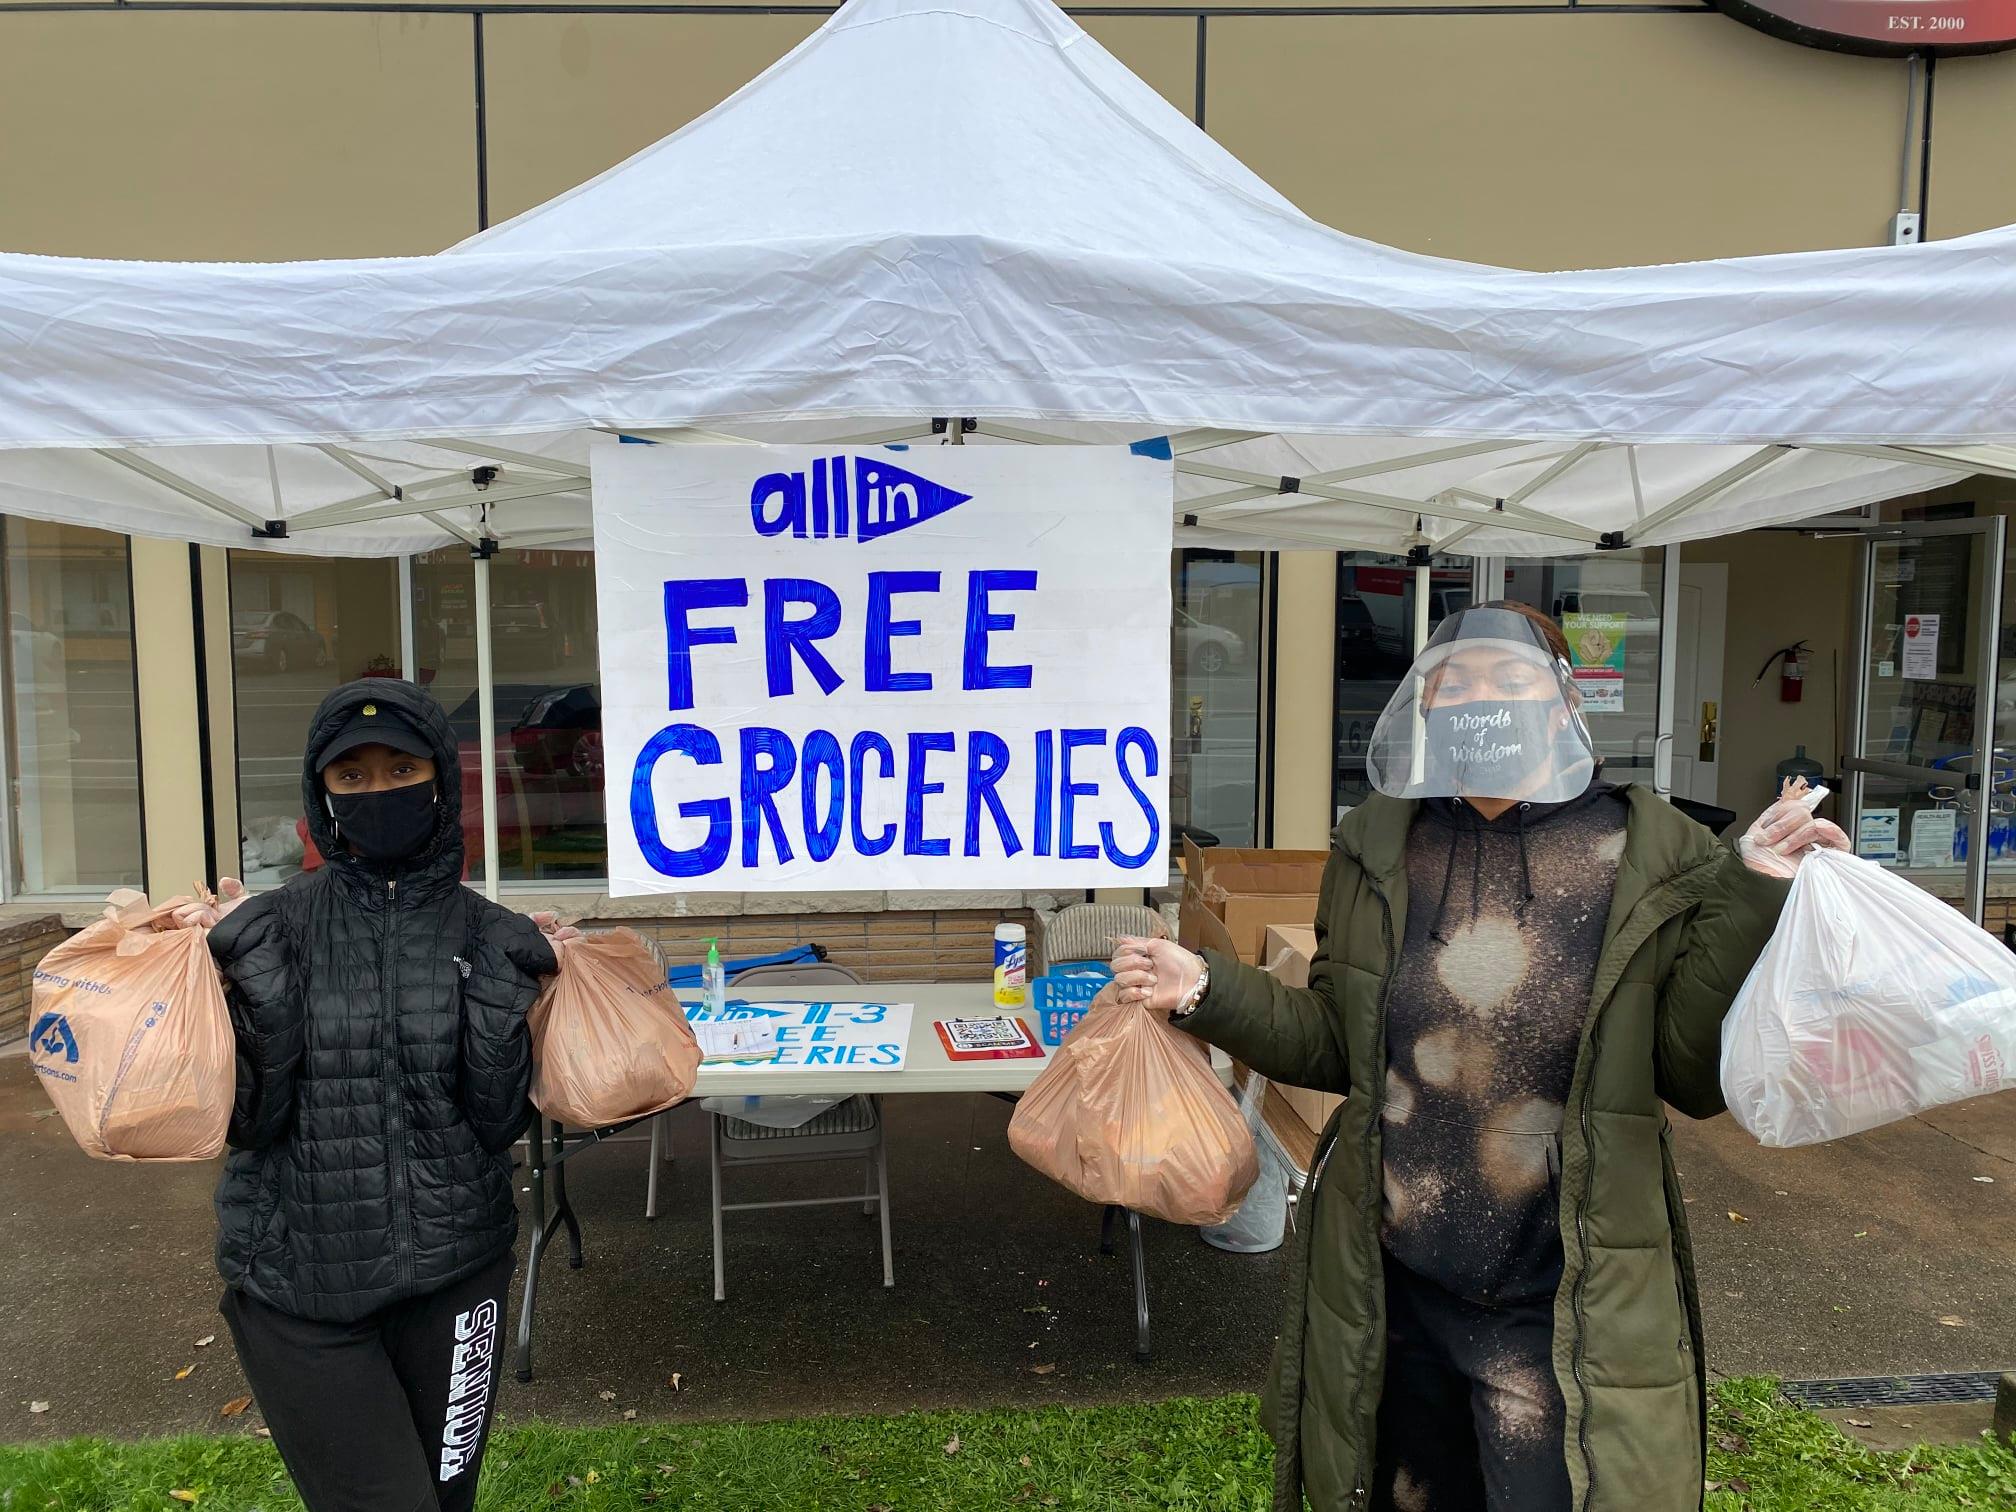 Two young Black women wearing puffy coats and face masks stand holding plastic bags of groceries outside booth with sign that says "All In: Free Groceries"